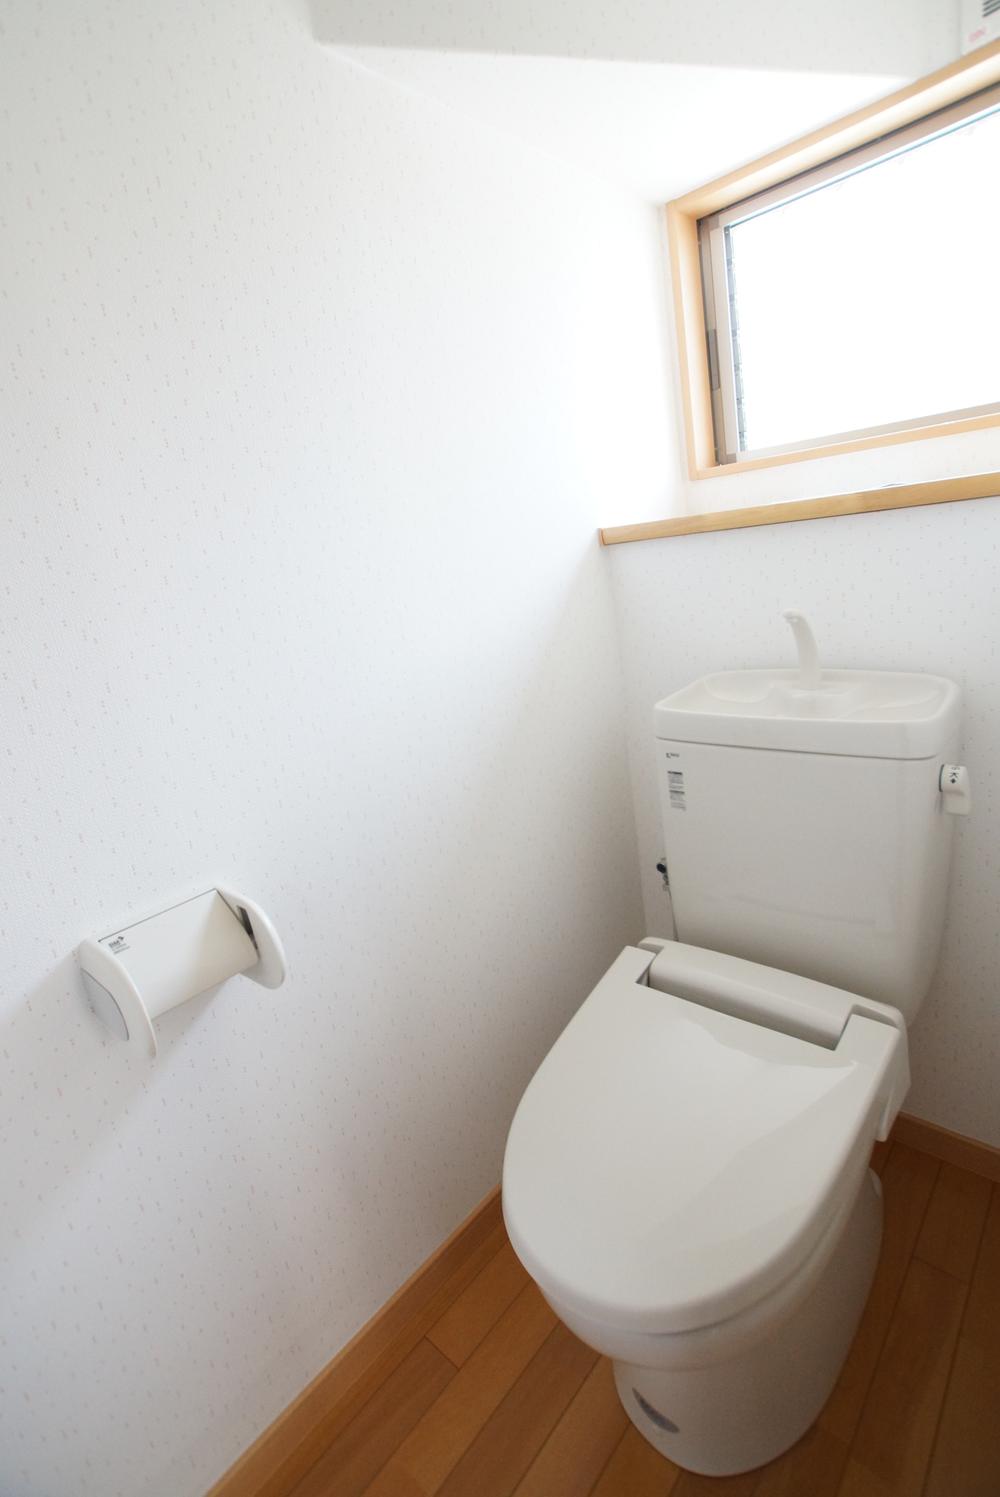 Same specifications photos (Other introspection). It is the toilet of the same specification.